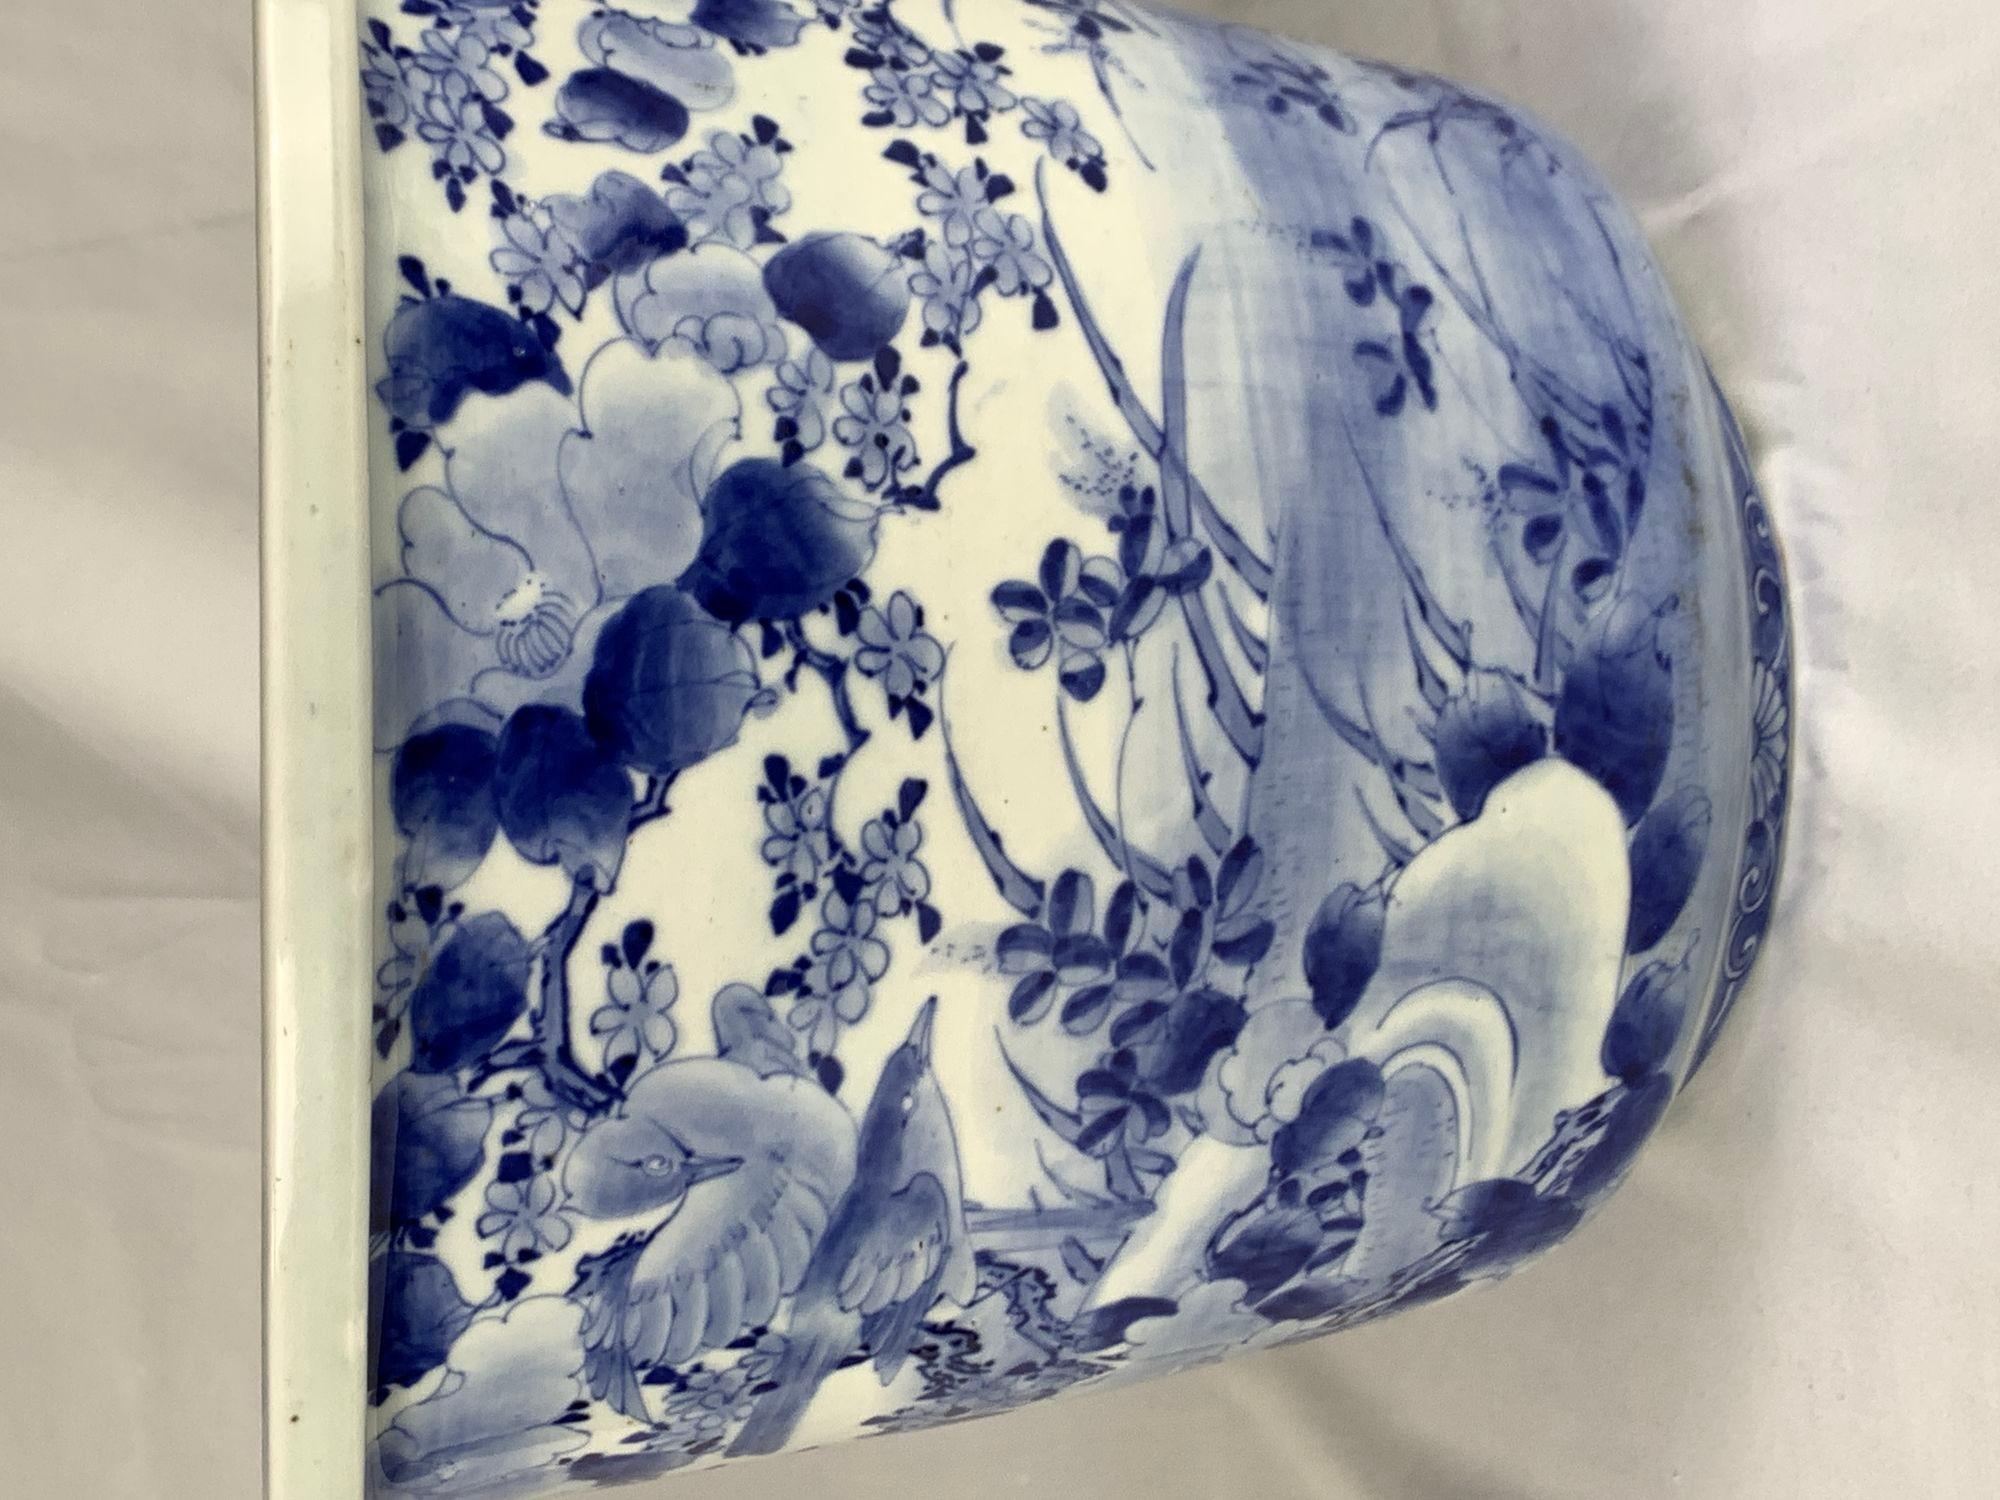 This large early 20th-century Japanese porcelain jardiniere with blue and white decoration is raised on three stub feet (see images).
The pot is decorated with a traditional scene of blossoming plum trees and a winding river with reeds and water